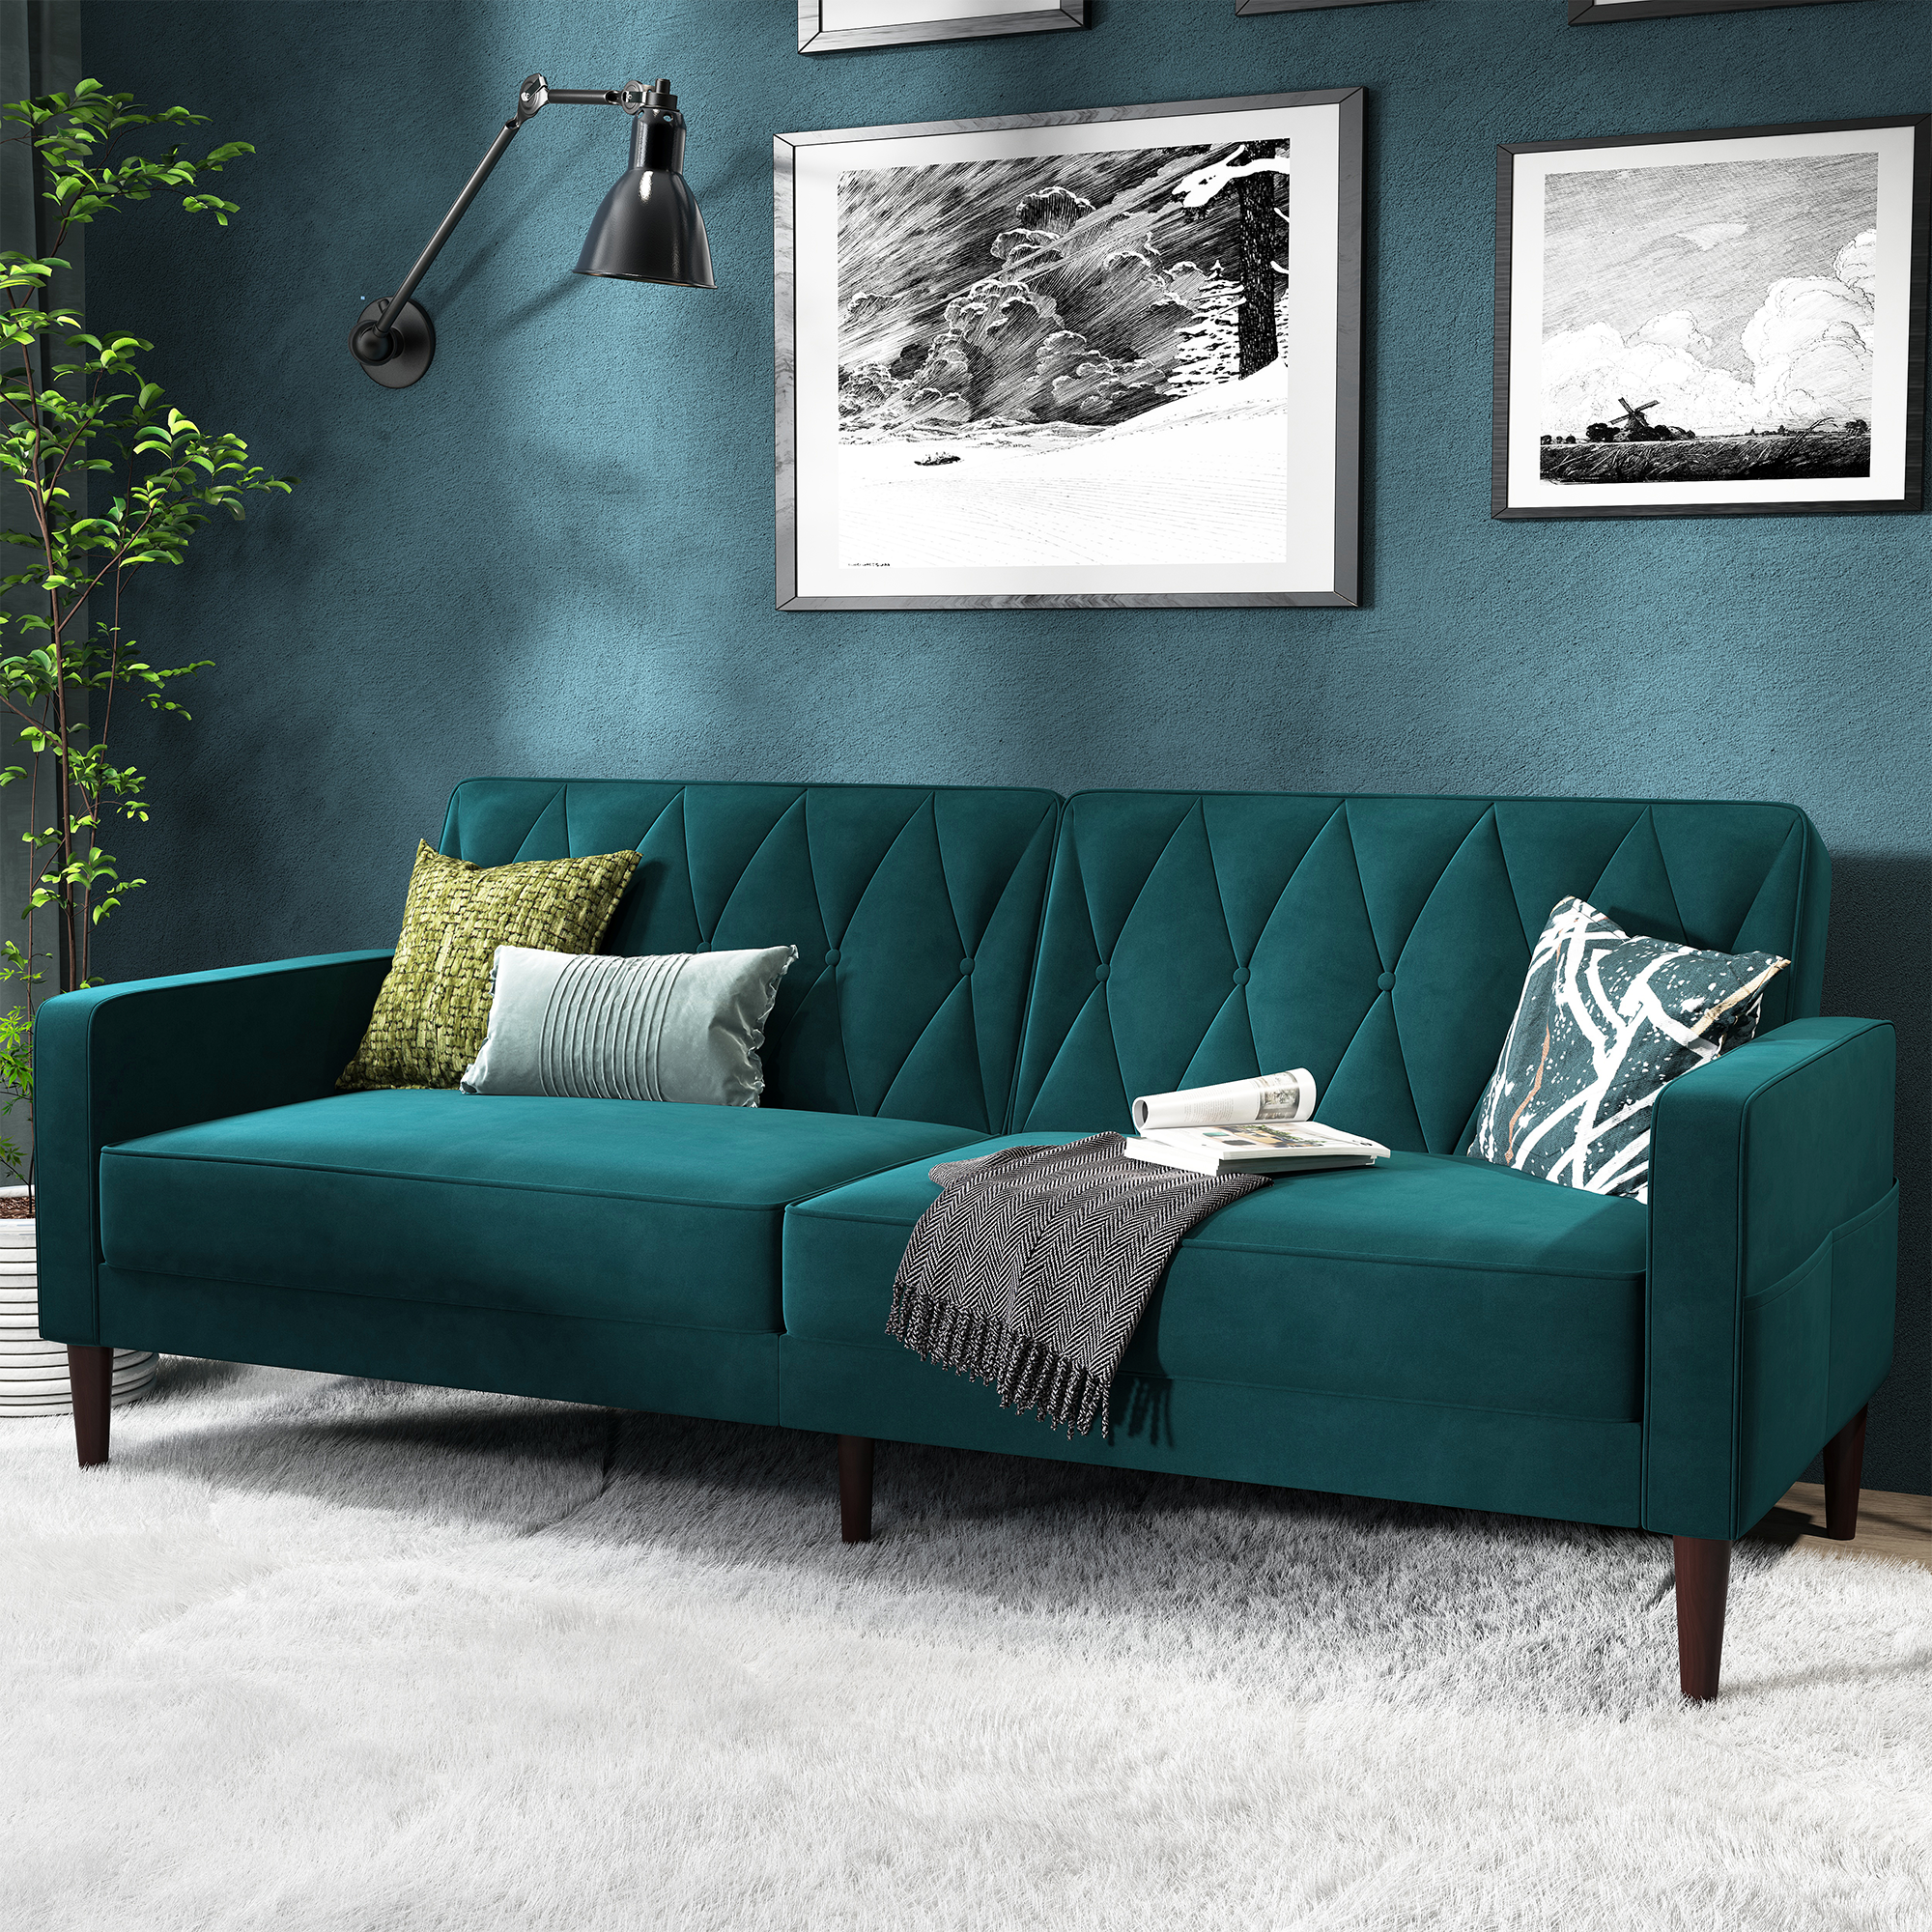 HONBAY Convertible Sleeper Sofa with Square Armrests